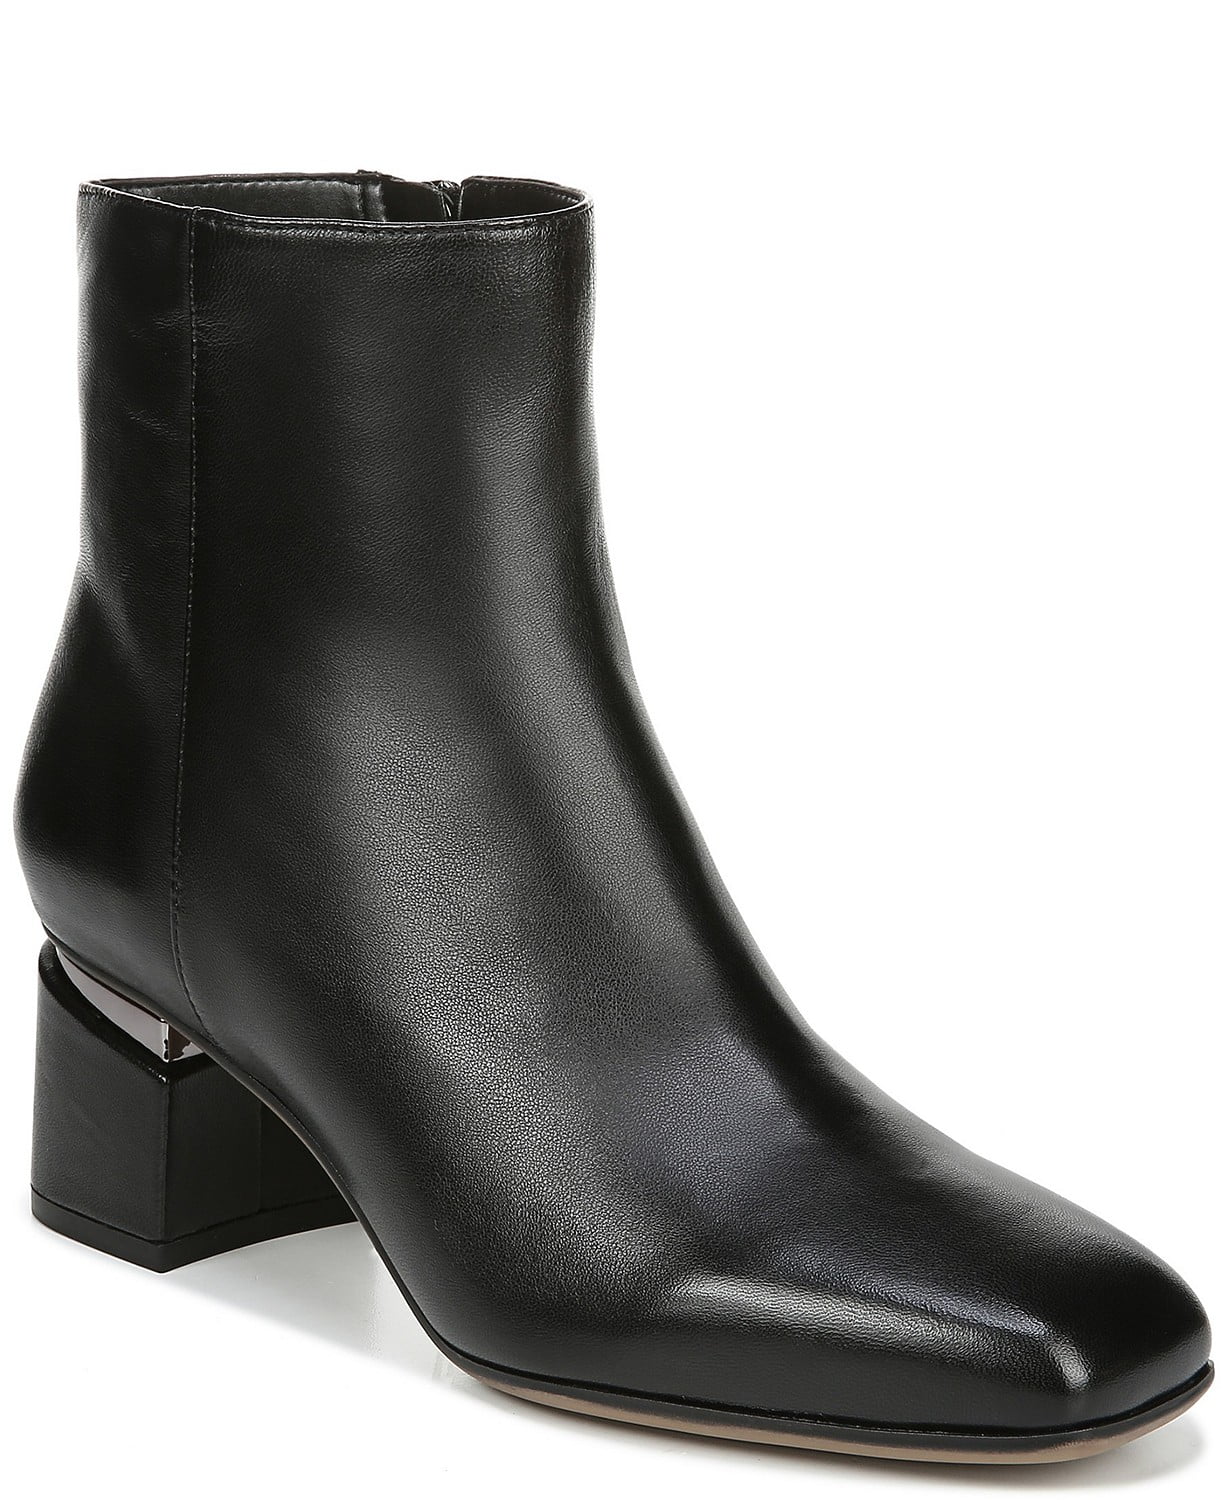 woocommerce-673321-2209615.cloudwaysapps.com-franco-sarto-womens-black-leather-marquee-booties